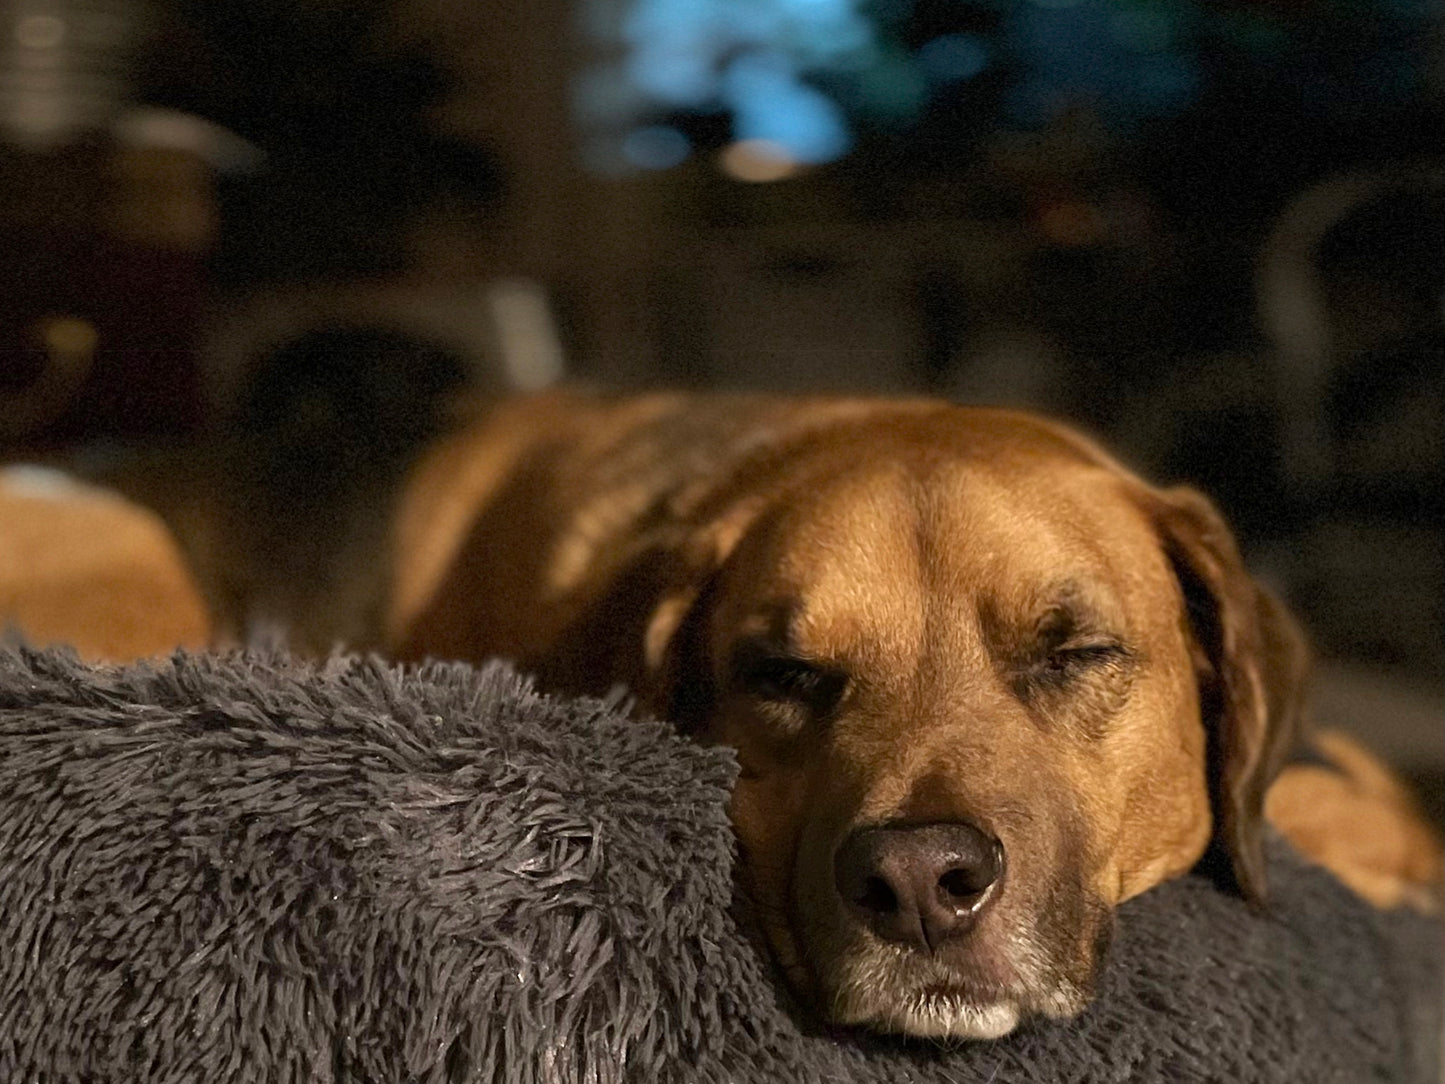 The official Olive+Comet mascot, Sonoma, sleeping in his favorite (and fluffy) donut bed. He's a medium-large dog, with soft floppy ears and beautiful medium-brown coloring.